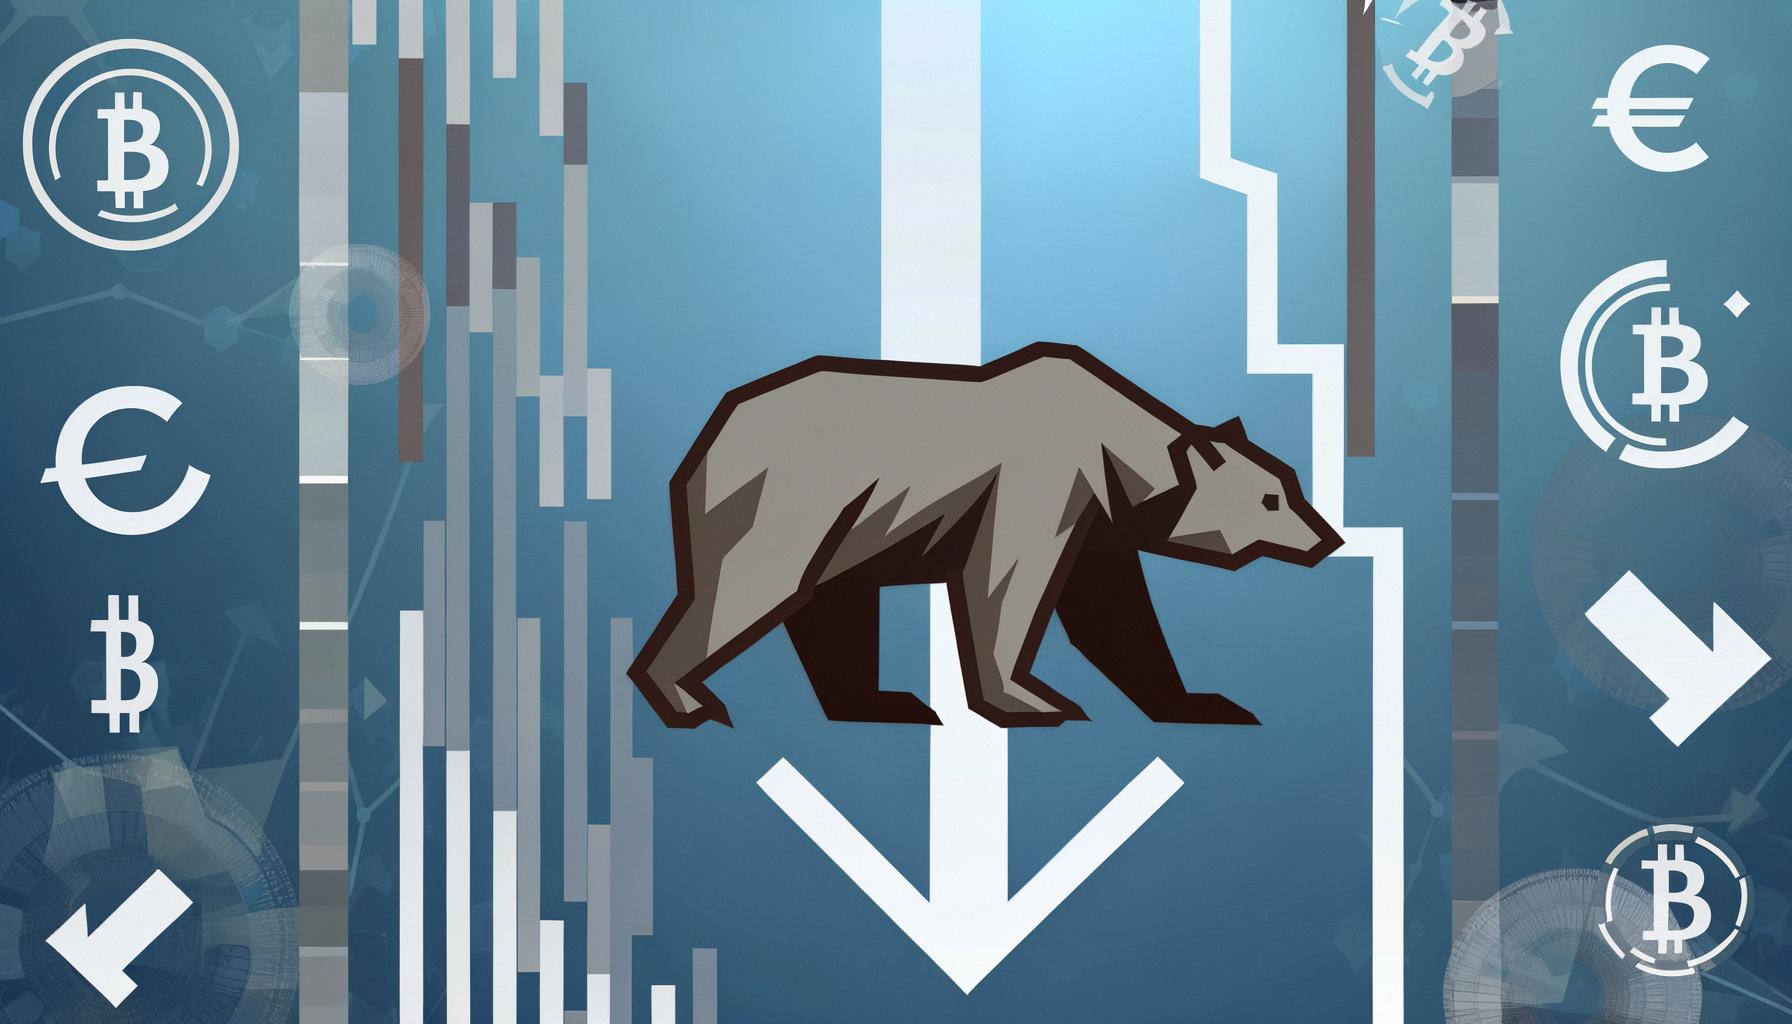 Cryptocurrency markets face persistent bearish trends